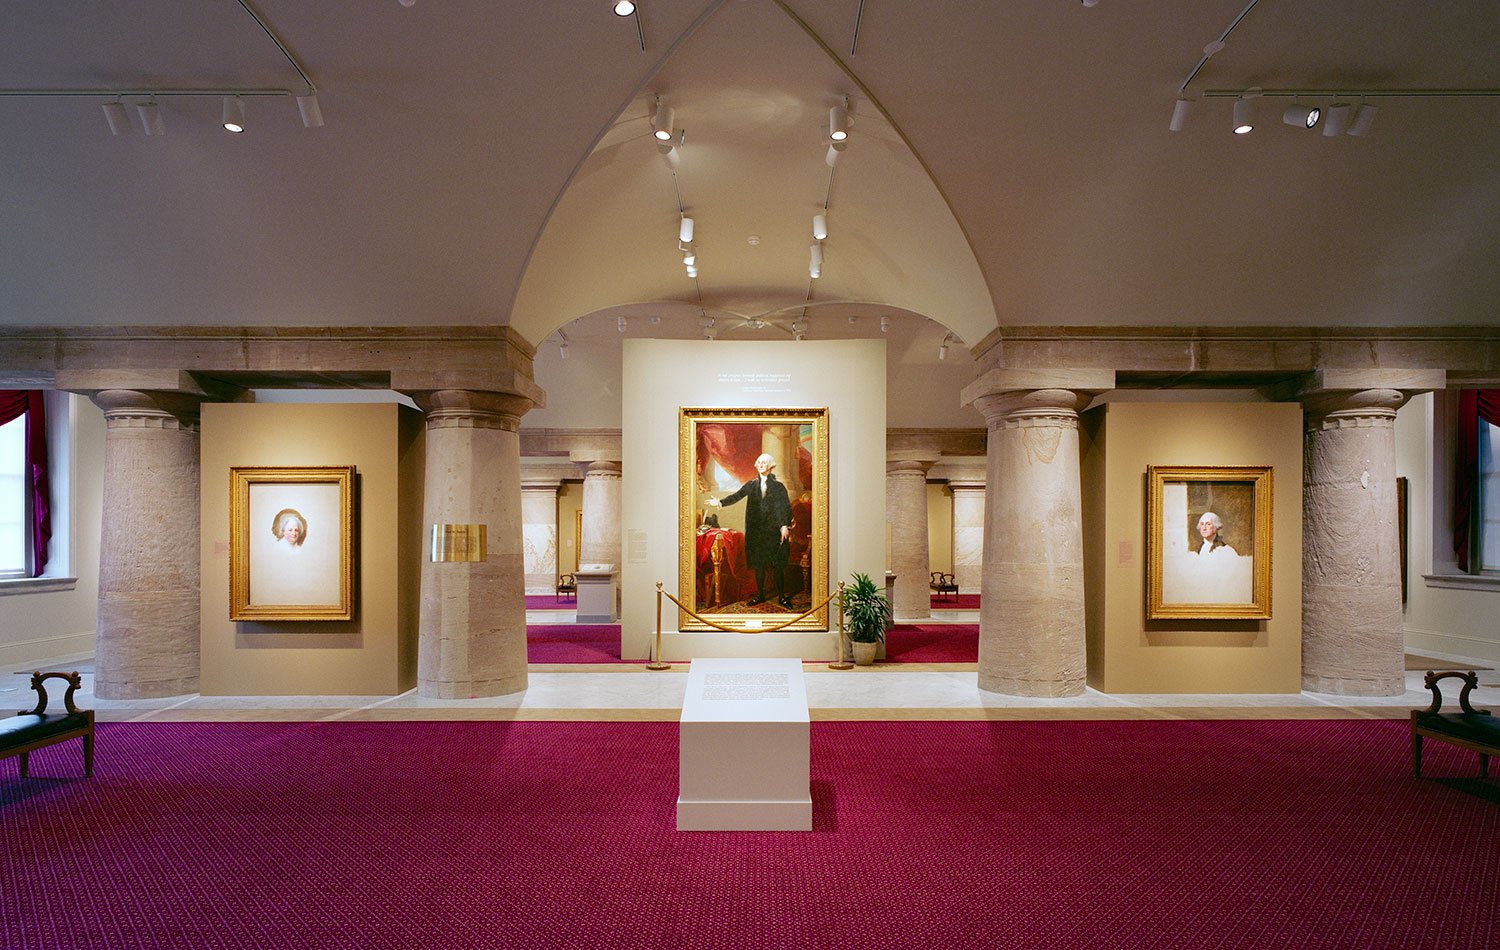 Donald W. Reynolds Center for American Art and Portraiture 